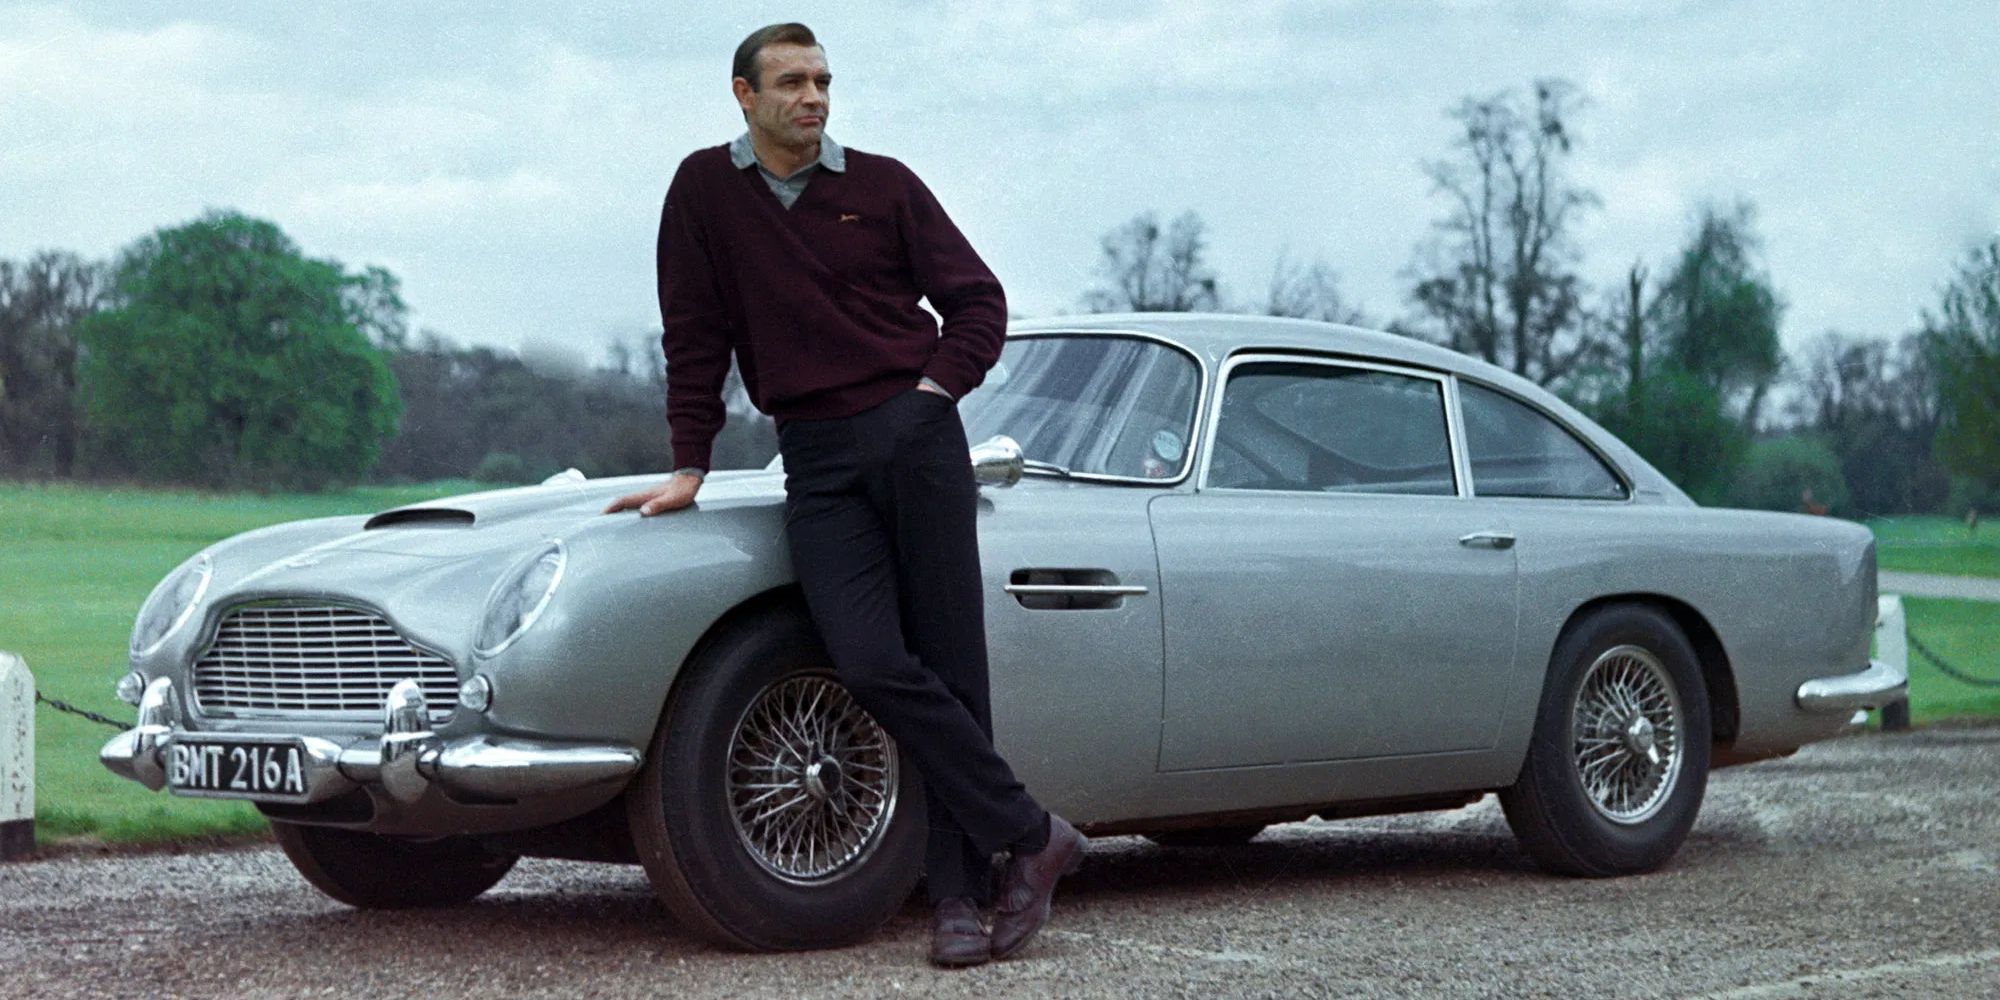 Sean Connery leaning on the DB5